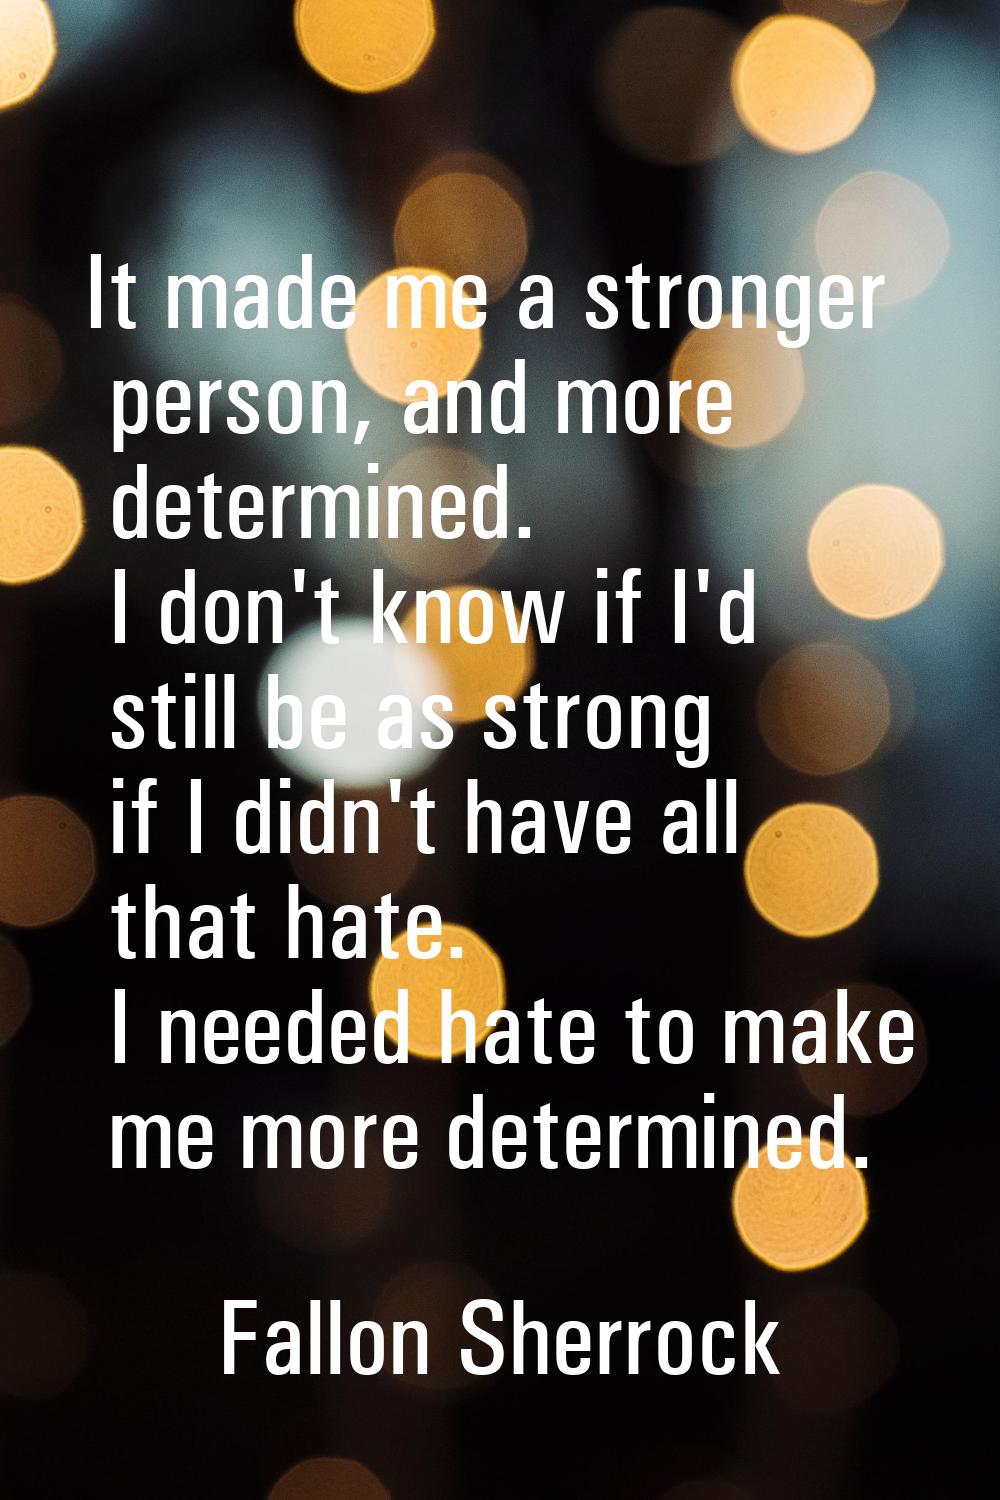 It made me a stronger person, and more determined. I don't know if I'd still be as strong if I didn